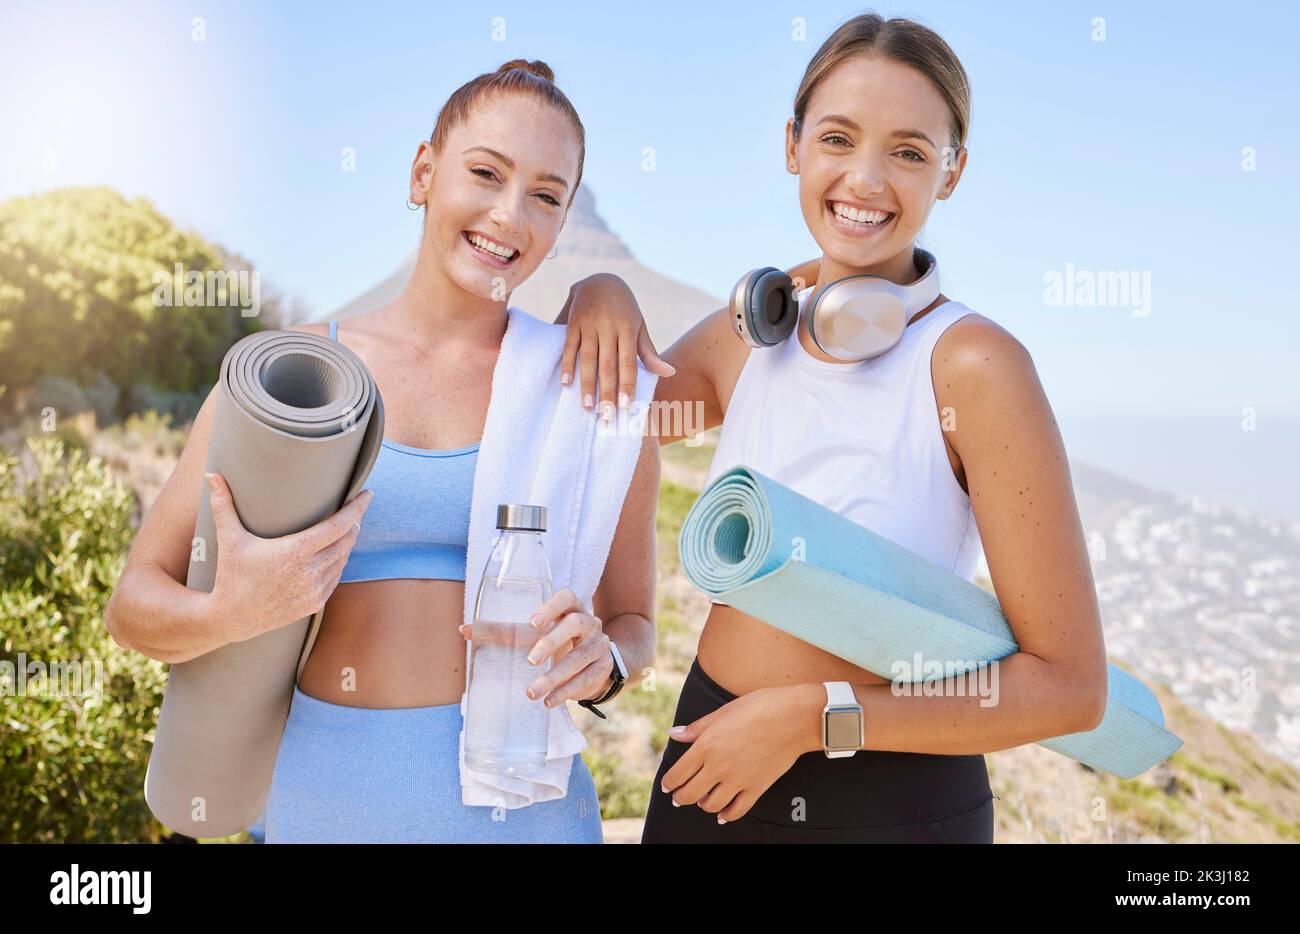 Outdoor fitness, yoga and women friends with workout motivation and training gear for wellness, healthy lifestyle in lens flare. Modern sports people Stock Photo